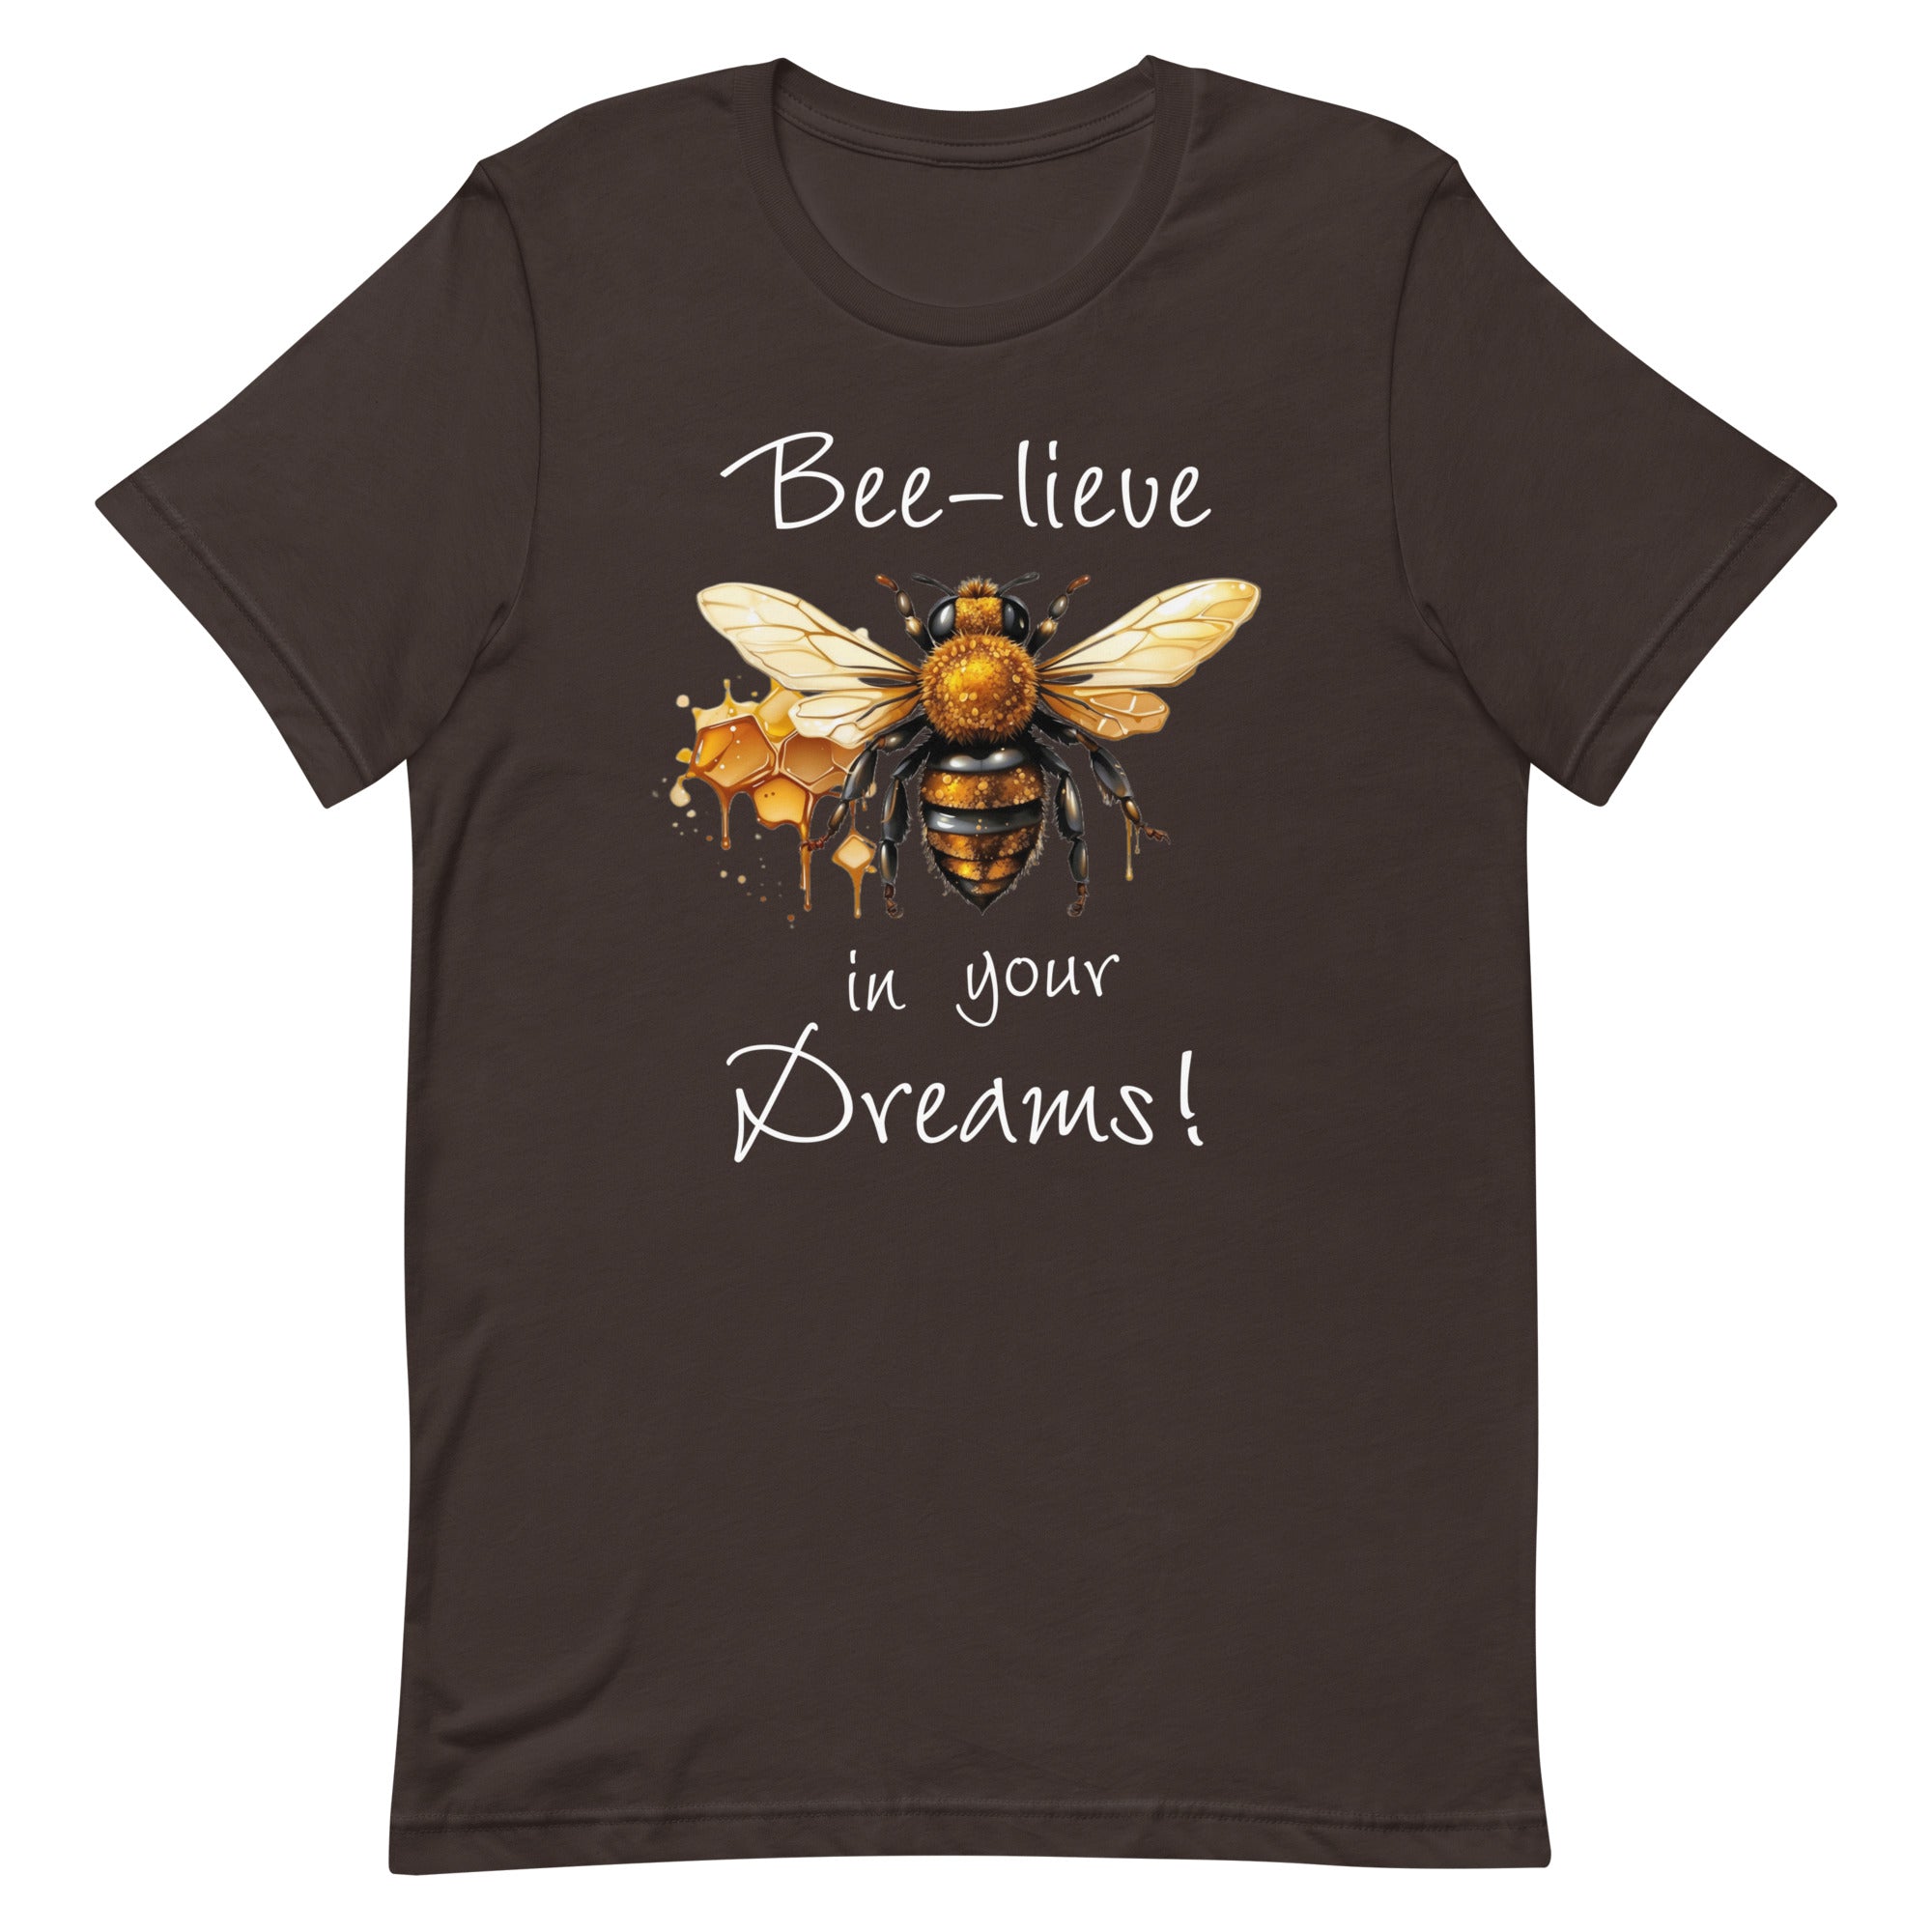 Bee-lieve in Your Dreams T-Shirt, Gift for Bee Lovers Brown S L XL M DenBox